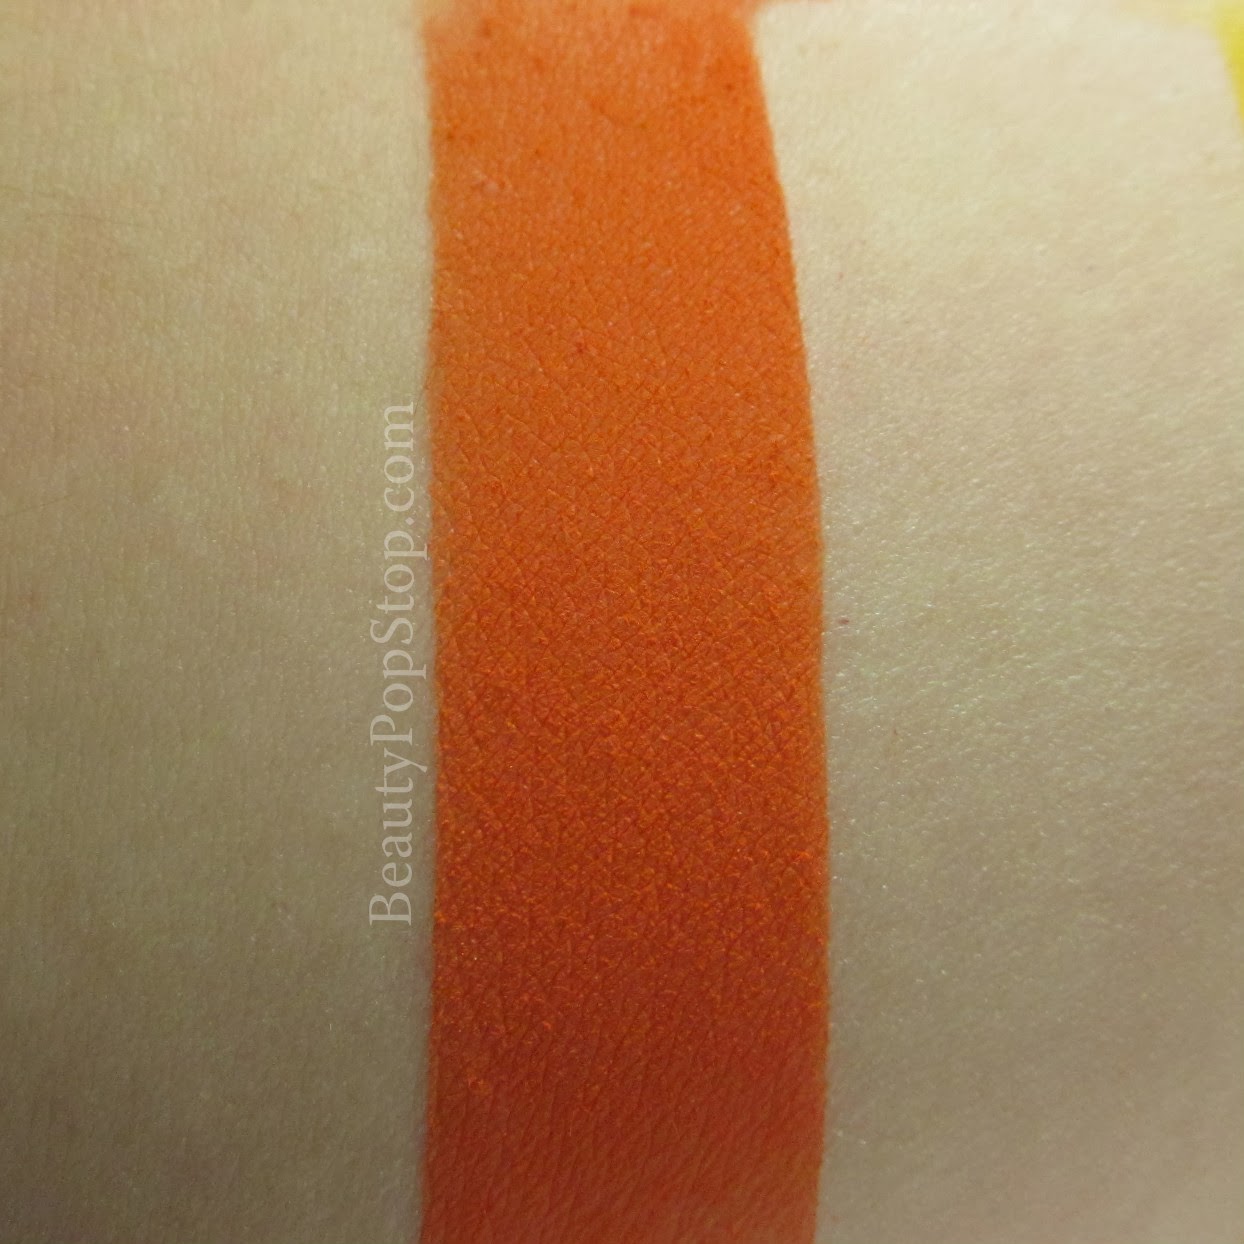 sugarpill pressed shadow flamepoint swatch